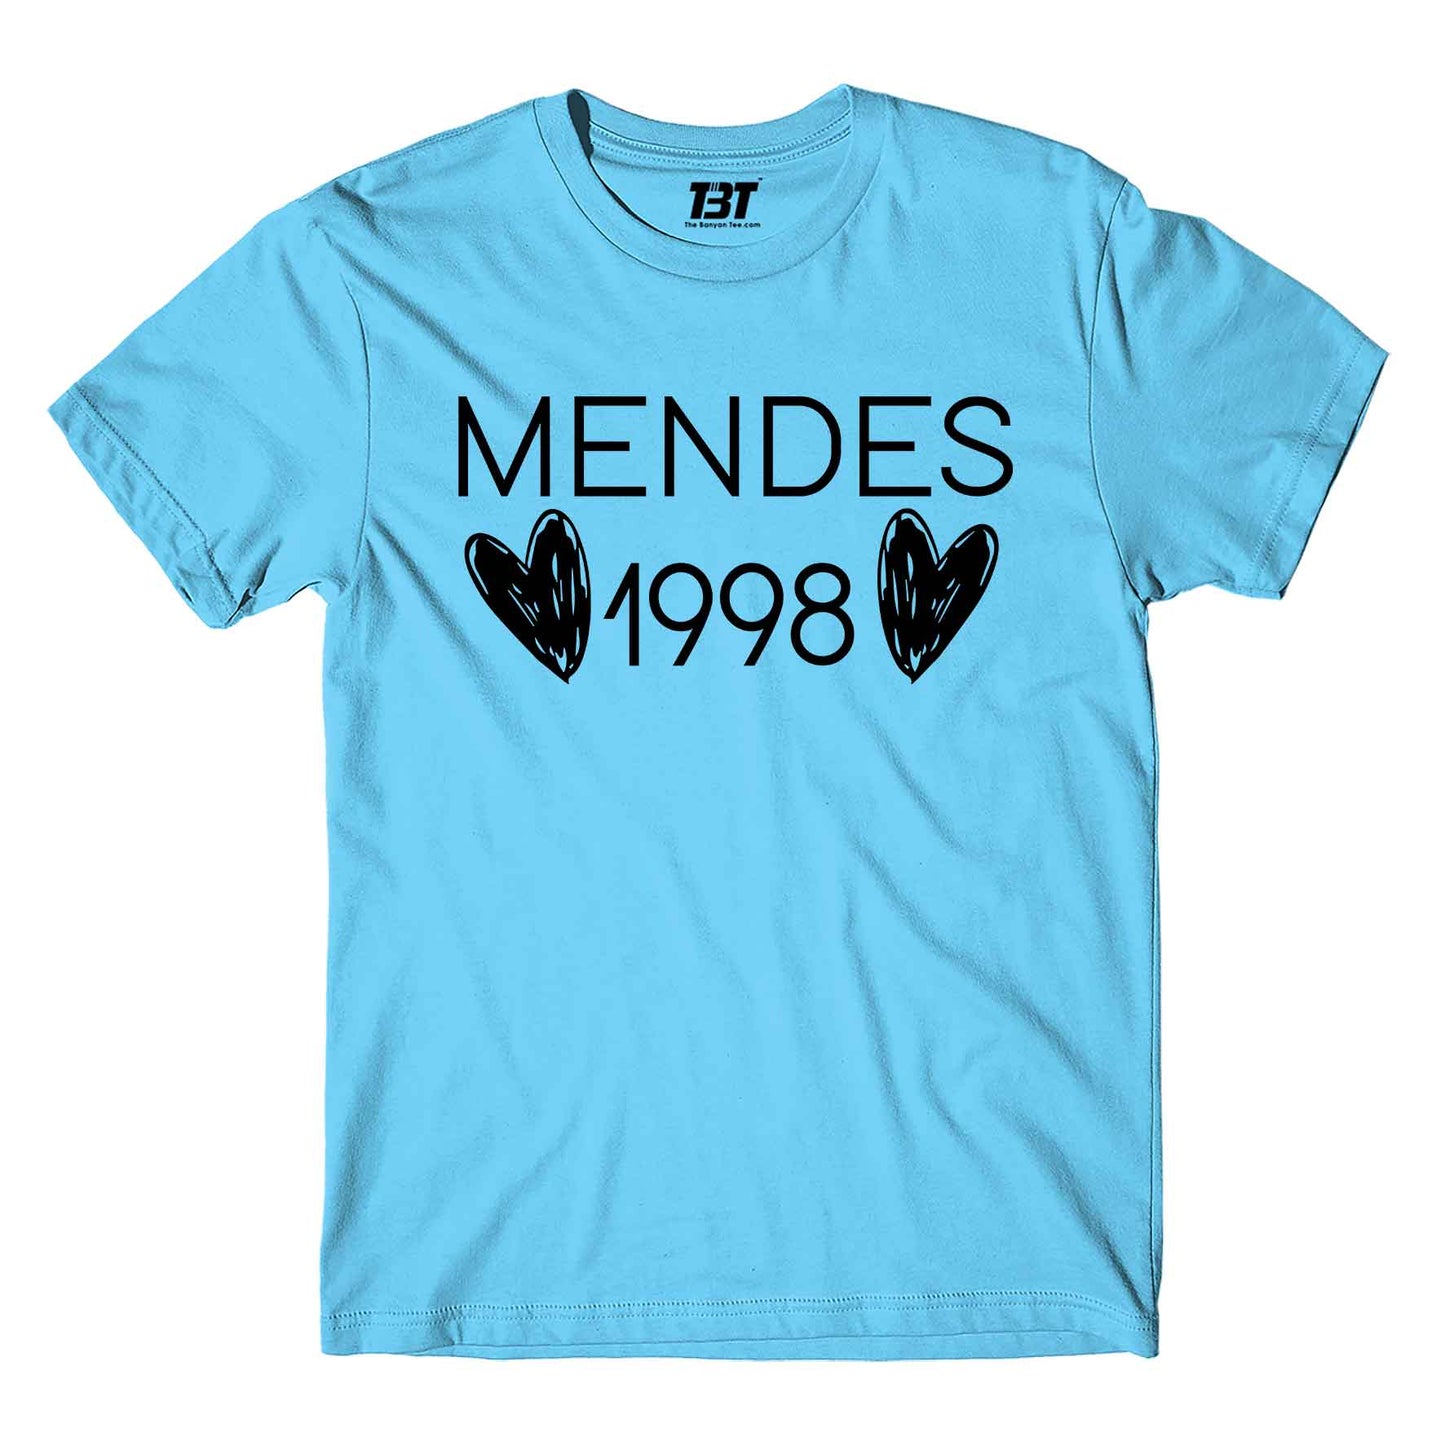 shawn mendes mendes 1998 t-shirt music band buy online usa united states the banyan tee tbt men women girls boys unisex sky blue